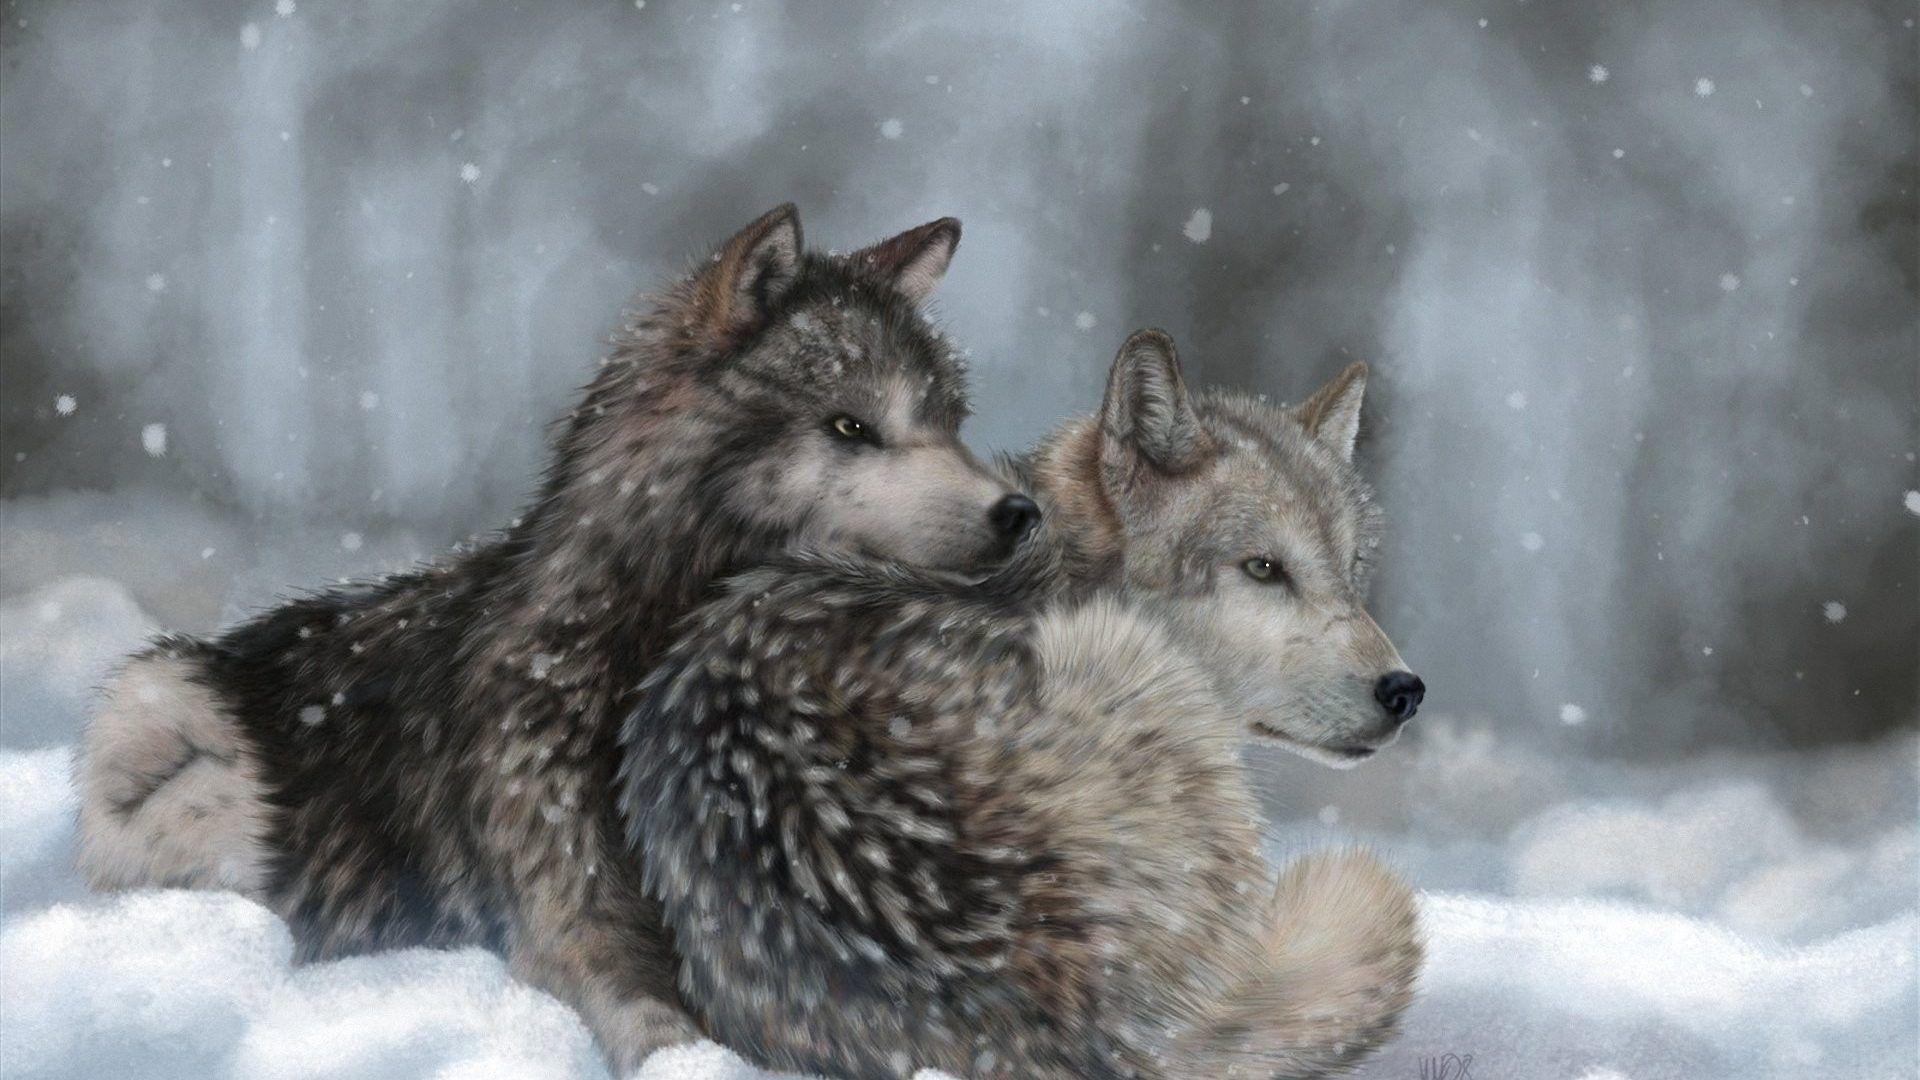 Wolf Tag wallpaper: Wolf Wolves Dogs Cute Image. Wolf